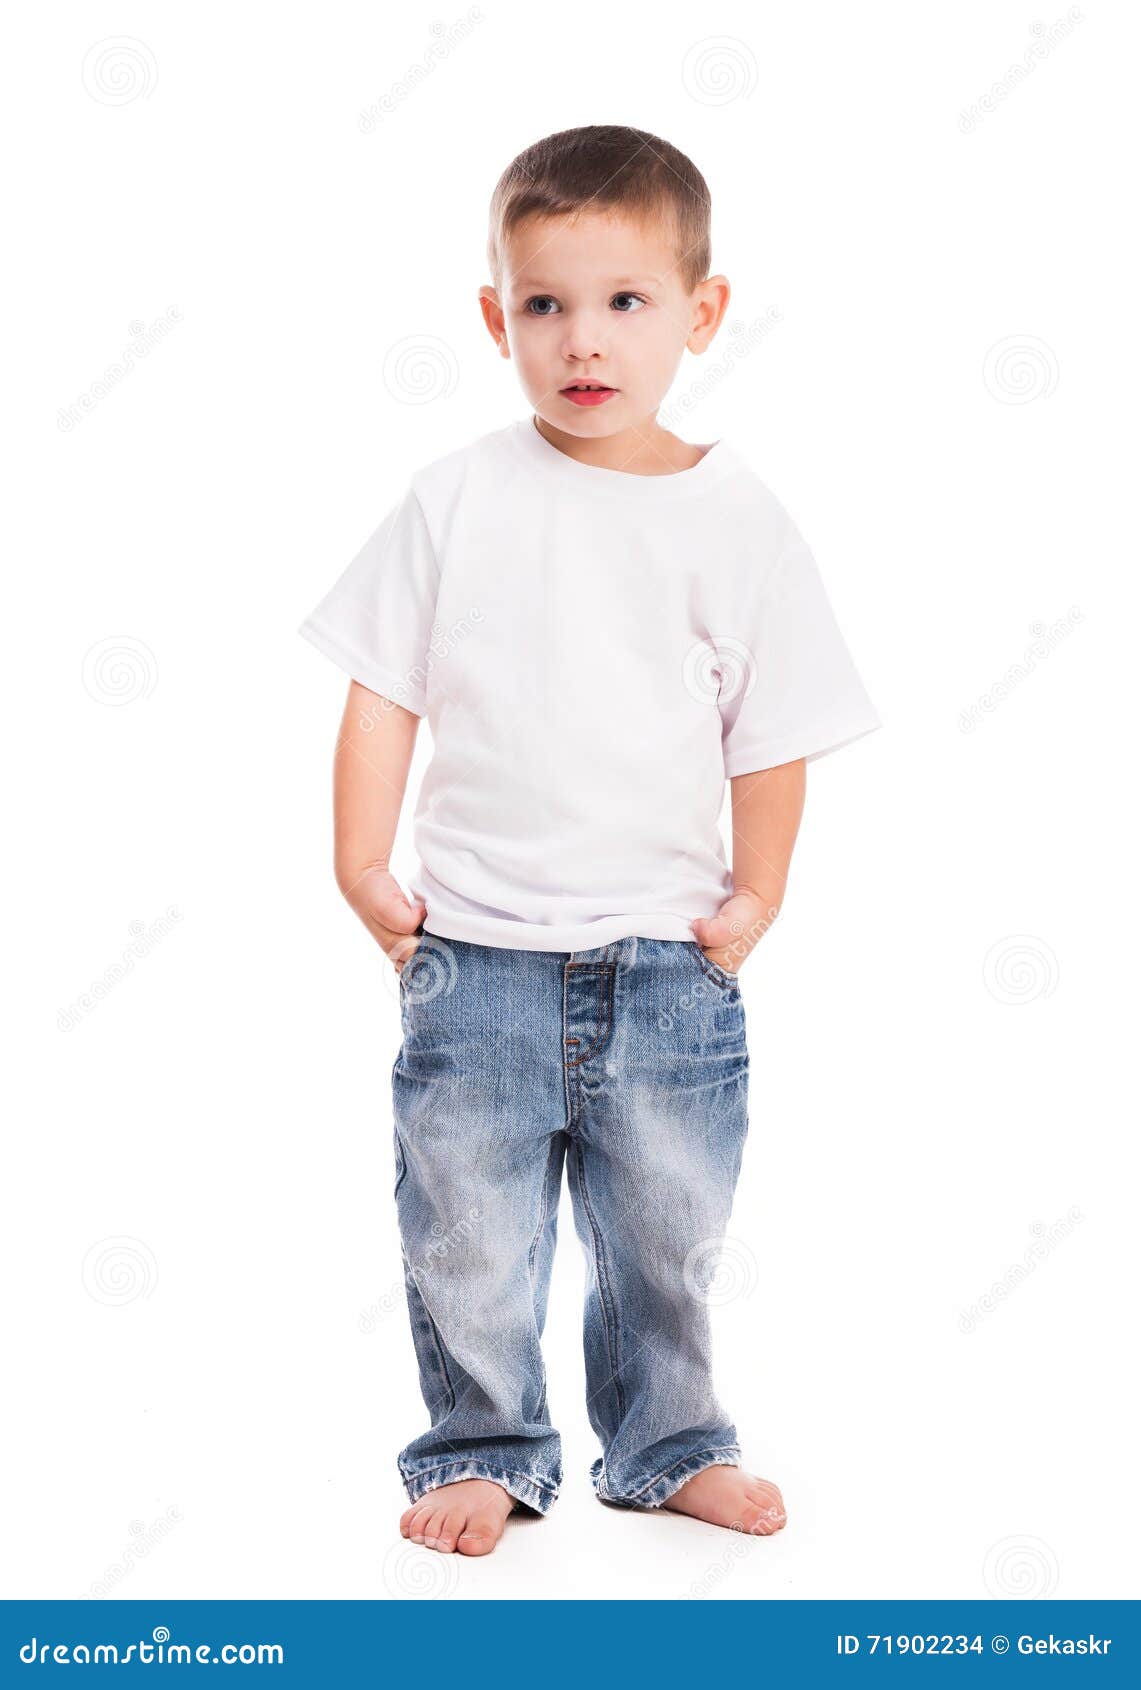 Little boy in white shirt stock photo. Image of person - 71902234